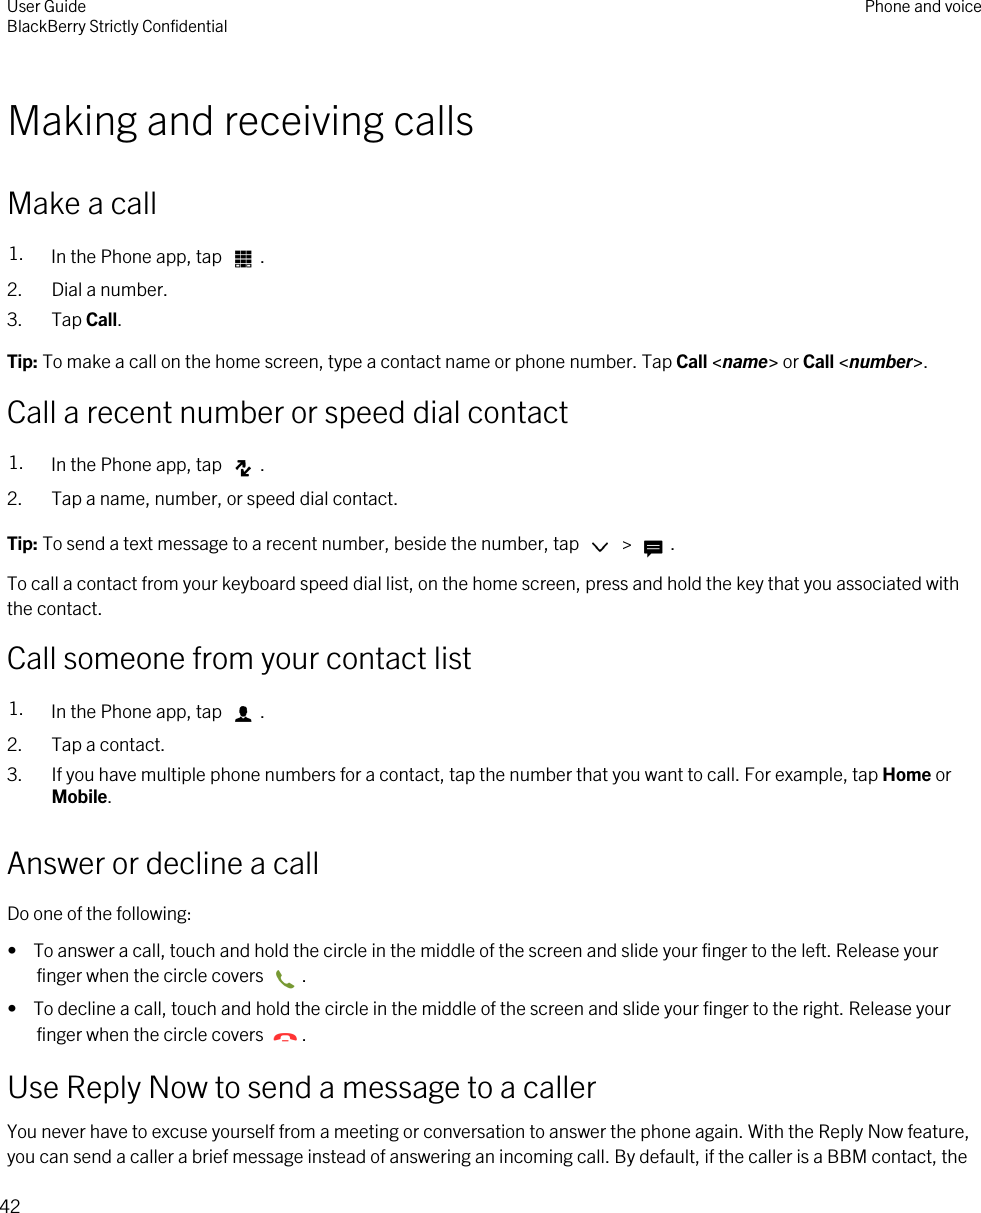 Making and receiving callsMake a call1. In the Phone app, tap  .2. Dial a number.3. Tap Call.Tip: To make a call on the home screen, type a contact name or phone number. Tap Call &lt;name&gt; or Call &lt;number&gt;.Call a recent number or speed dial contact1. In the Phone app, tap  .2. Tap a name, number, or speed dial contact.Tip: To send a text message to a recent number, beside the number, tap   &gt;  .To call a contact from your keyboard speed dial list, on the home screen, press and hold the key that you associated with the contact.Call someone from your contact list1. In the Phone app, tap  .2. Tap a contact.3. If you have multiple phone numbers for a contact, tap the number that you want to call. For example, tap Home or Mobile.Answer or decline a callDo one of the following:•  To answer a call, touch and hold the circle in the middle of the screen and slide your finger to the left. Release your finger when the circle covers  .•  To decline a call, touch and hold the circle in the middle of the screen and slide your finger to the right. Release your finger when the circle covers  .Use Reply Now to send a message to a callerYou never have to excuse yourself from a meeting or conversation to answer the phone again. With the Reply Now feature, you can send a caller a brief message instead of answering an incoming call. By default, if the caller is a BBM contact, the User GuideBlackBerry Strictly Confidential Phone and voice42